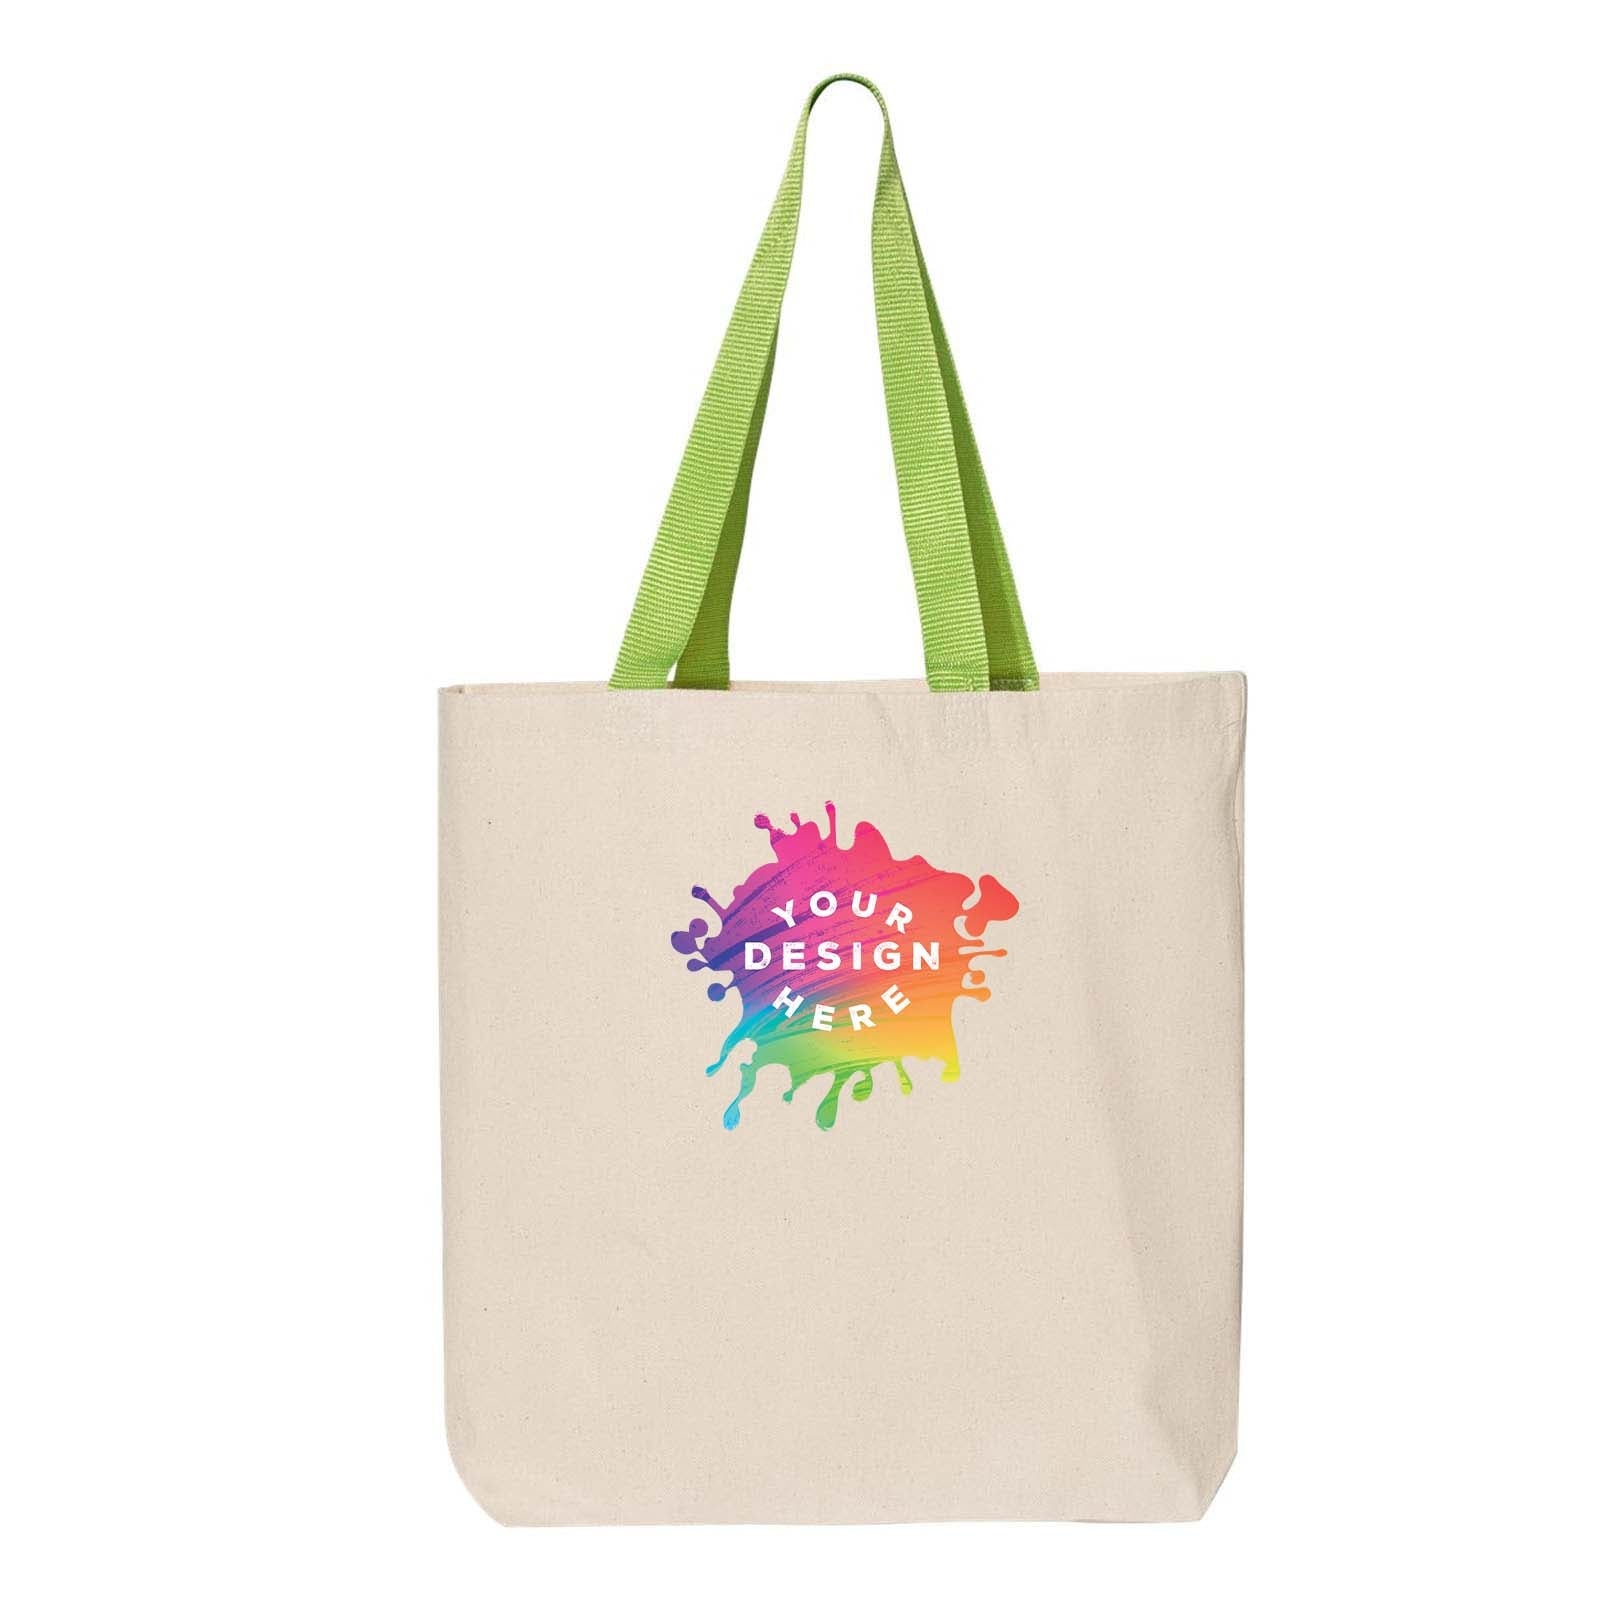 Q-Tees 11L Canvas Tote with Contrast-Color Handles - Mato & Hash